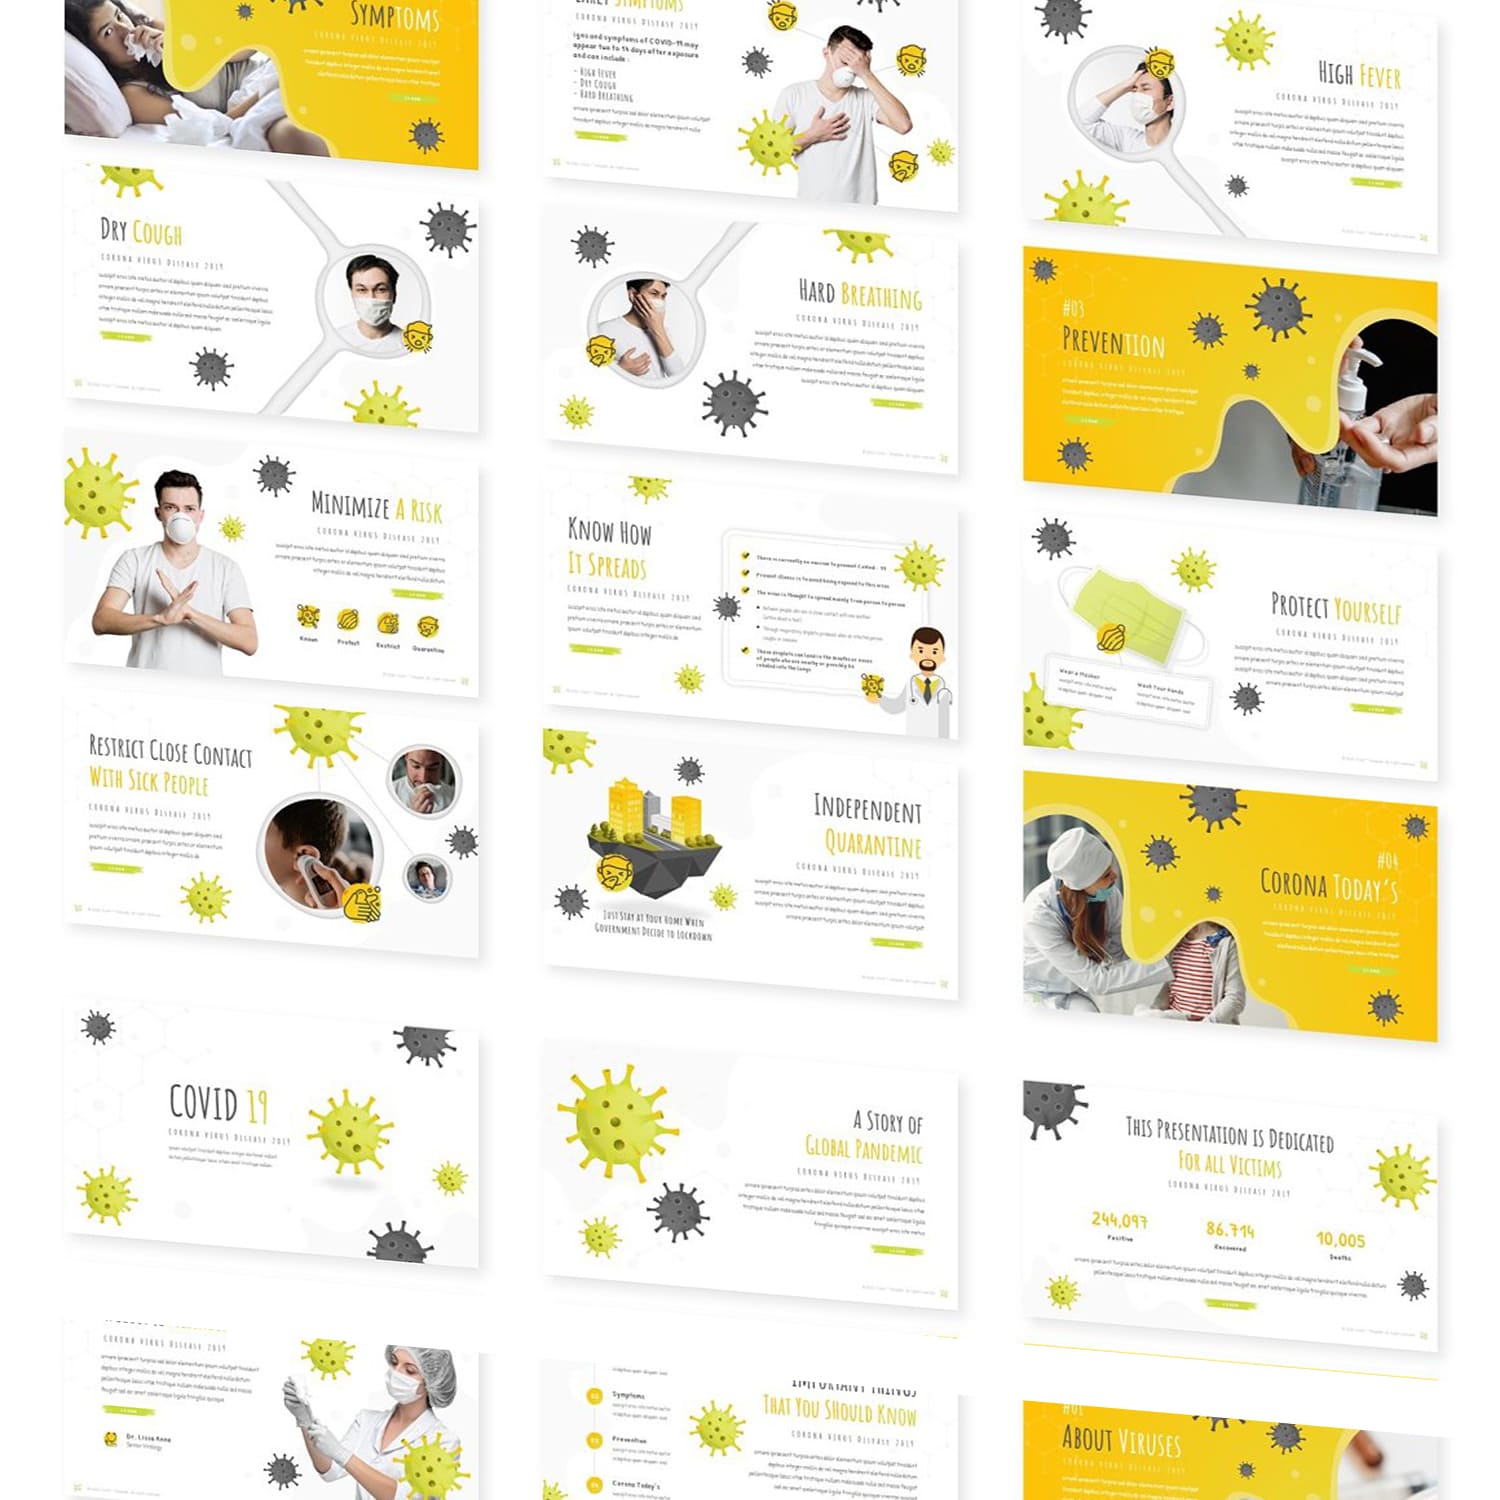 Covid 19 - Powerpoint Template cover image.